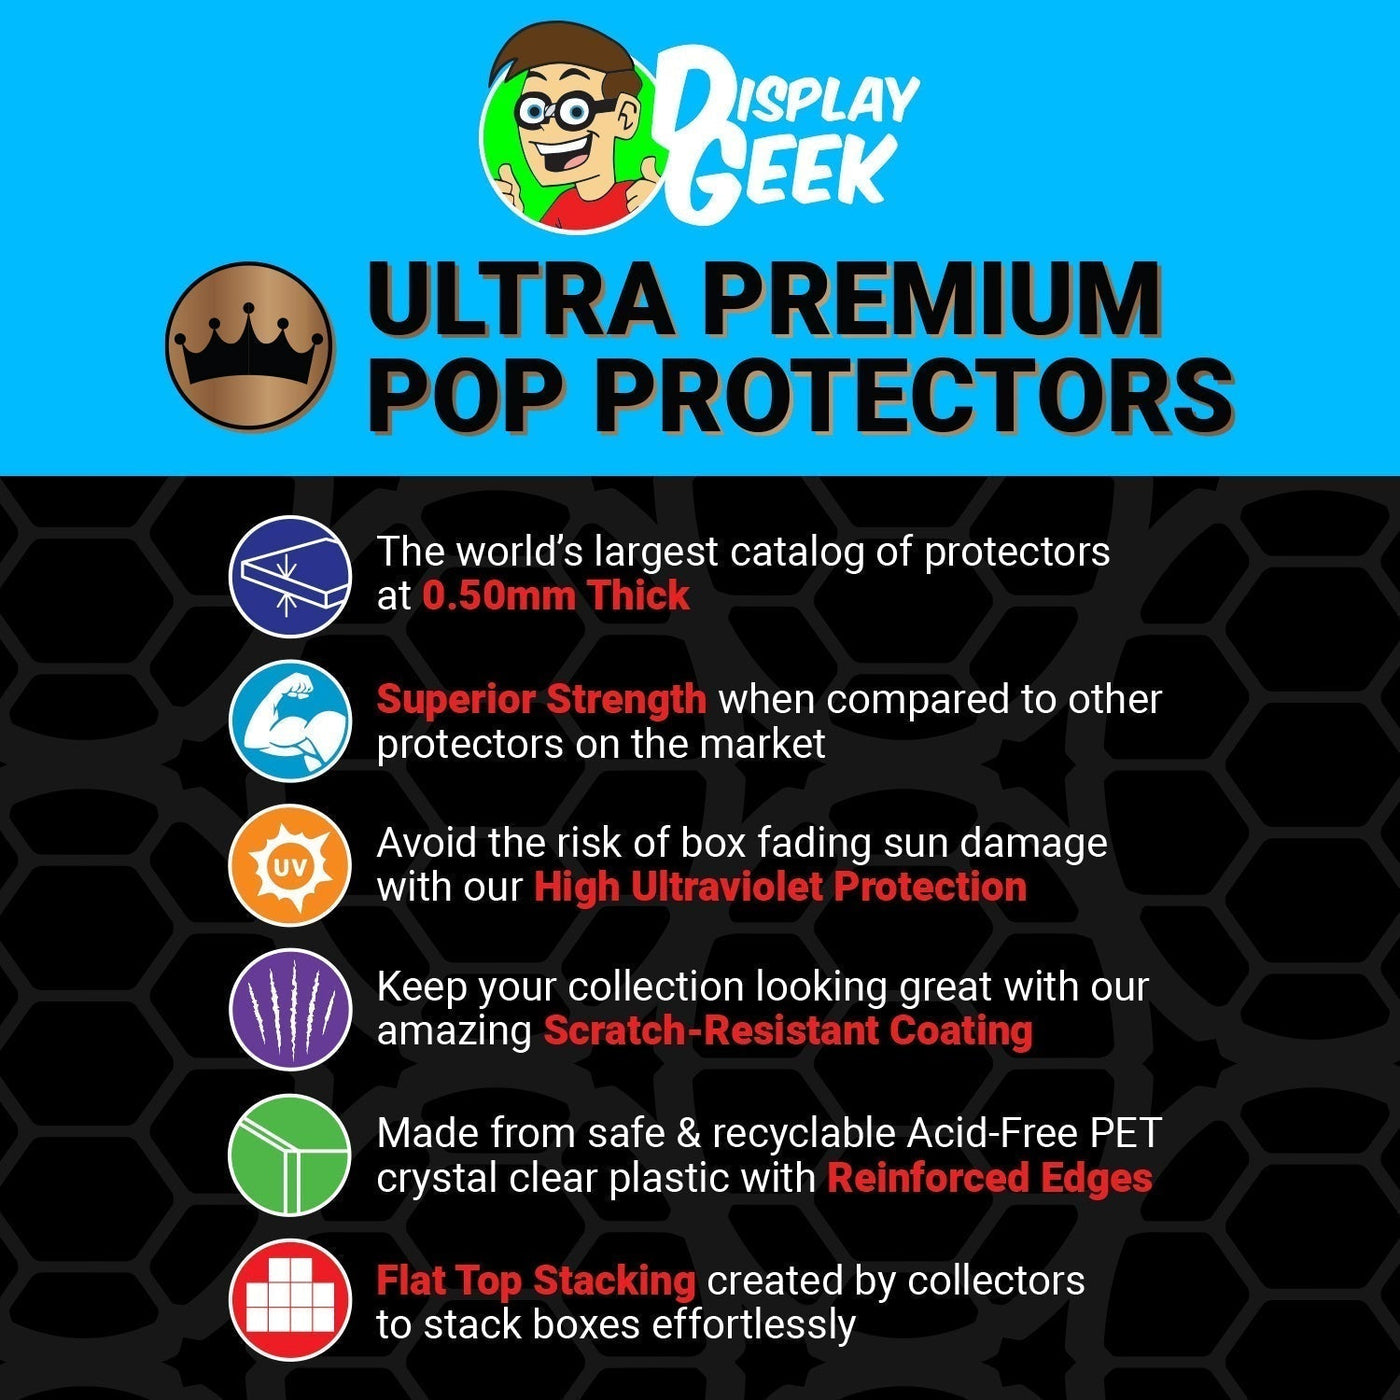 Pop Protector for Brandalised Tagging Robot #02 Funko Pop Art Covers on The Protector Guide App by Display Geek